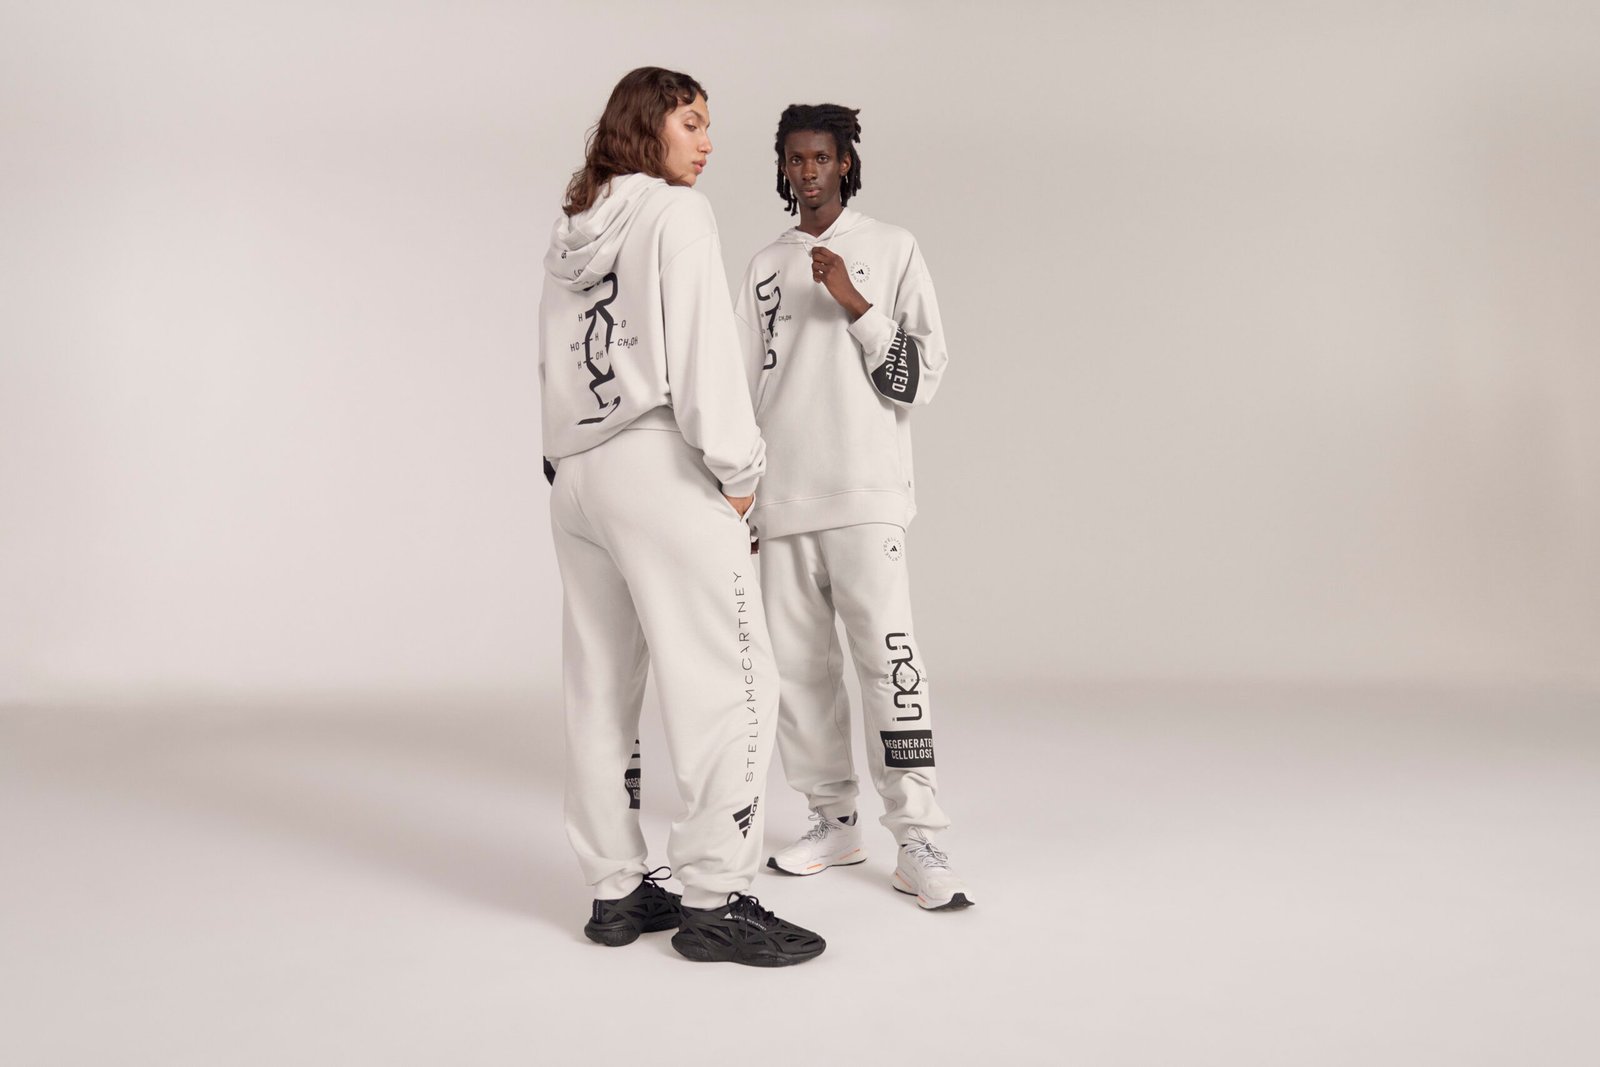 ADIDAS BY STELLA MCCARTNEY UNVEIL INDUSTRY-FIRST, WITH VISCOSE SPORTSWEAR MADE IN COLLABORATION WITH 12 PIONEERING PARTNERS